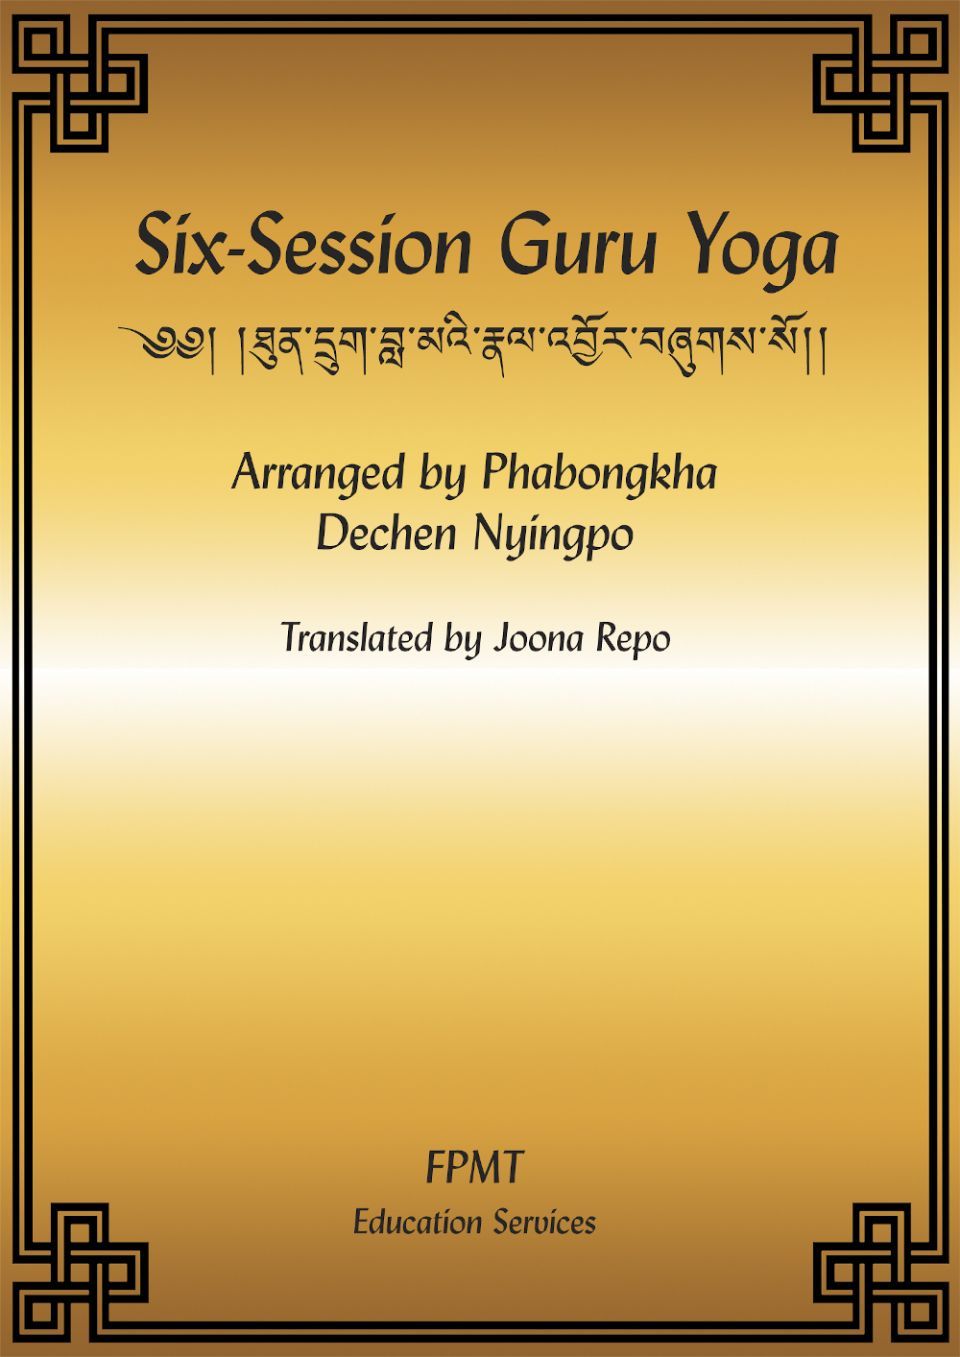 Six-Session Guru Yoga Root Verses and Commentaries